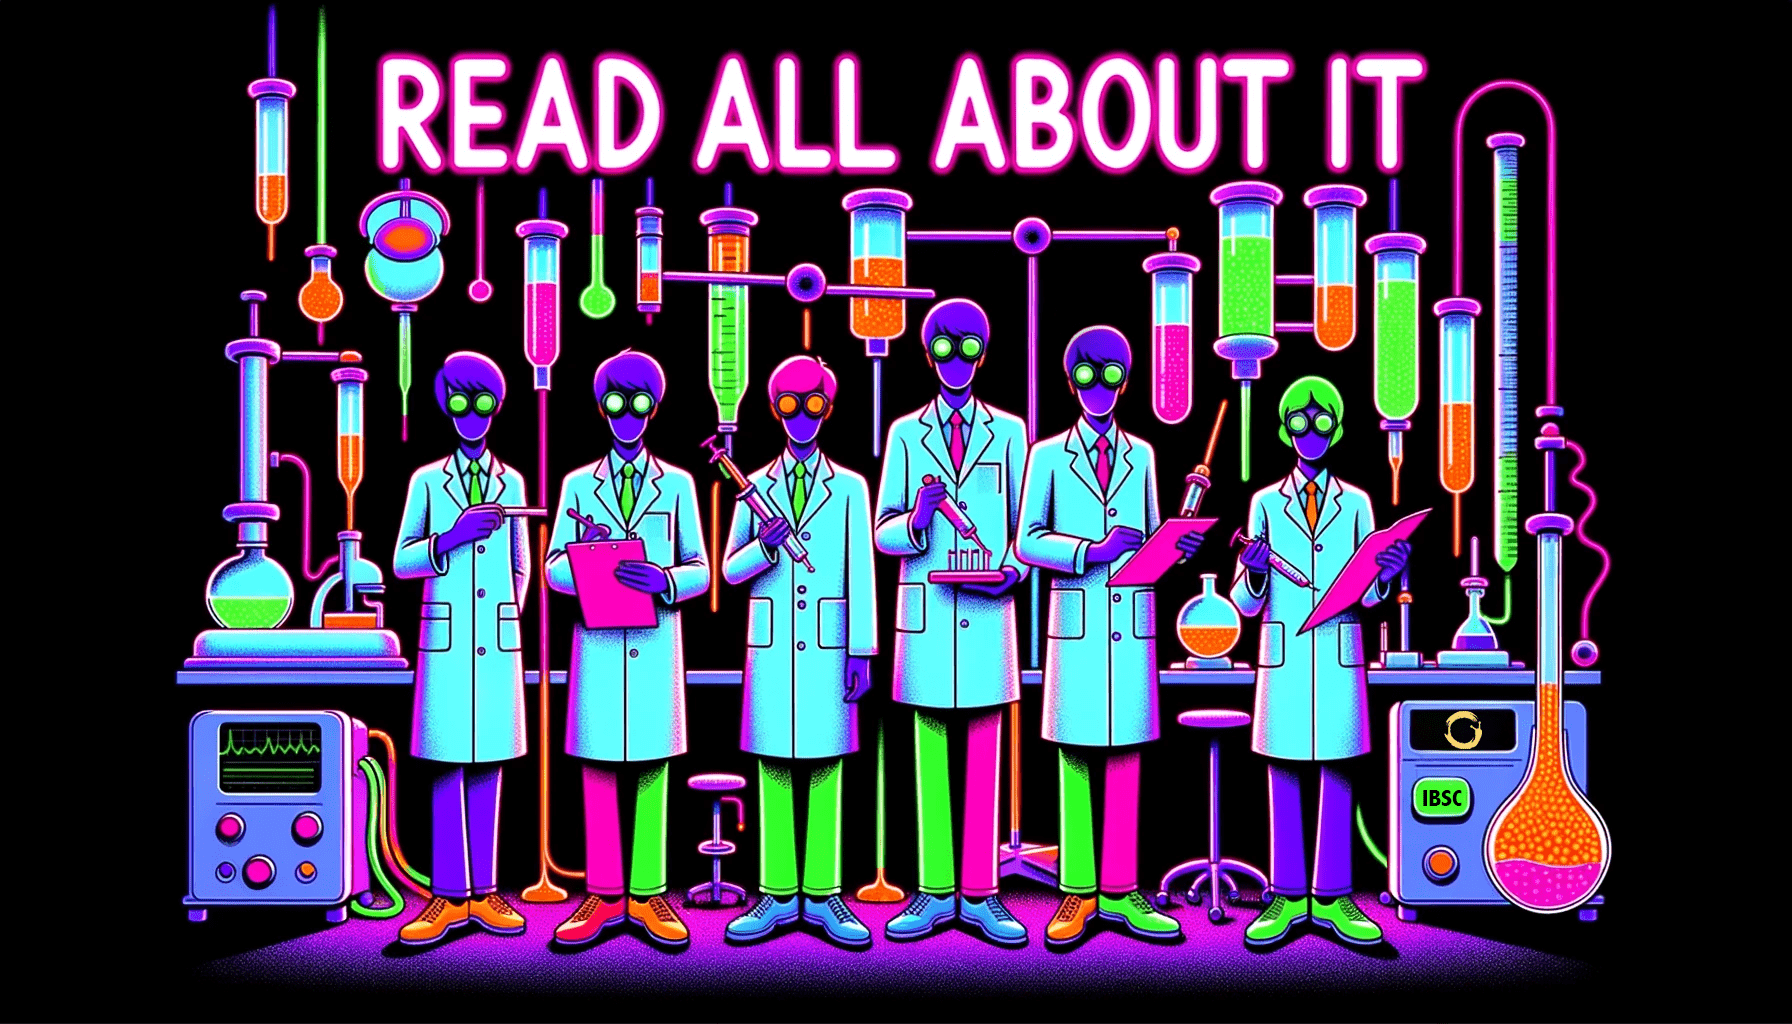 IBSC Newsletter banner showing neon scientists and the phrase "read all about it"